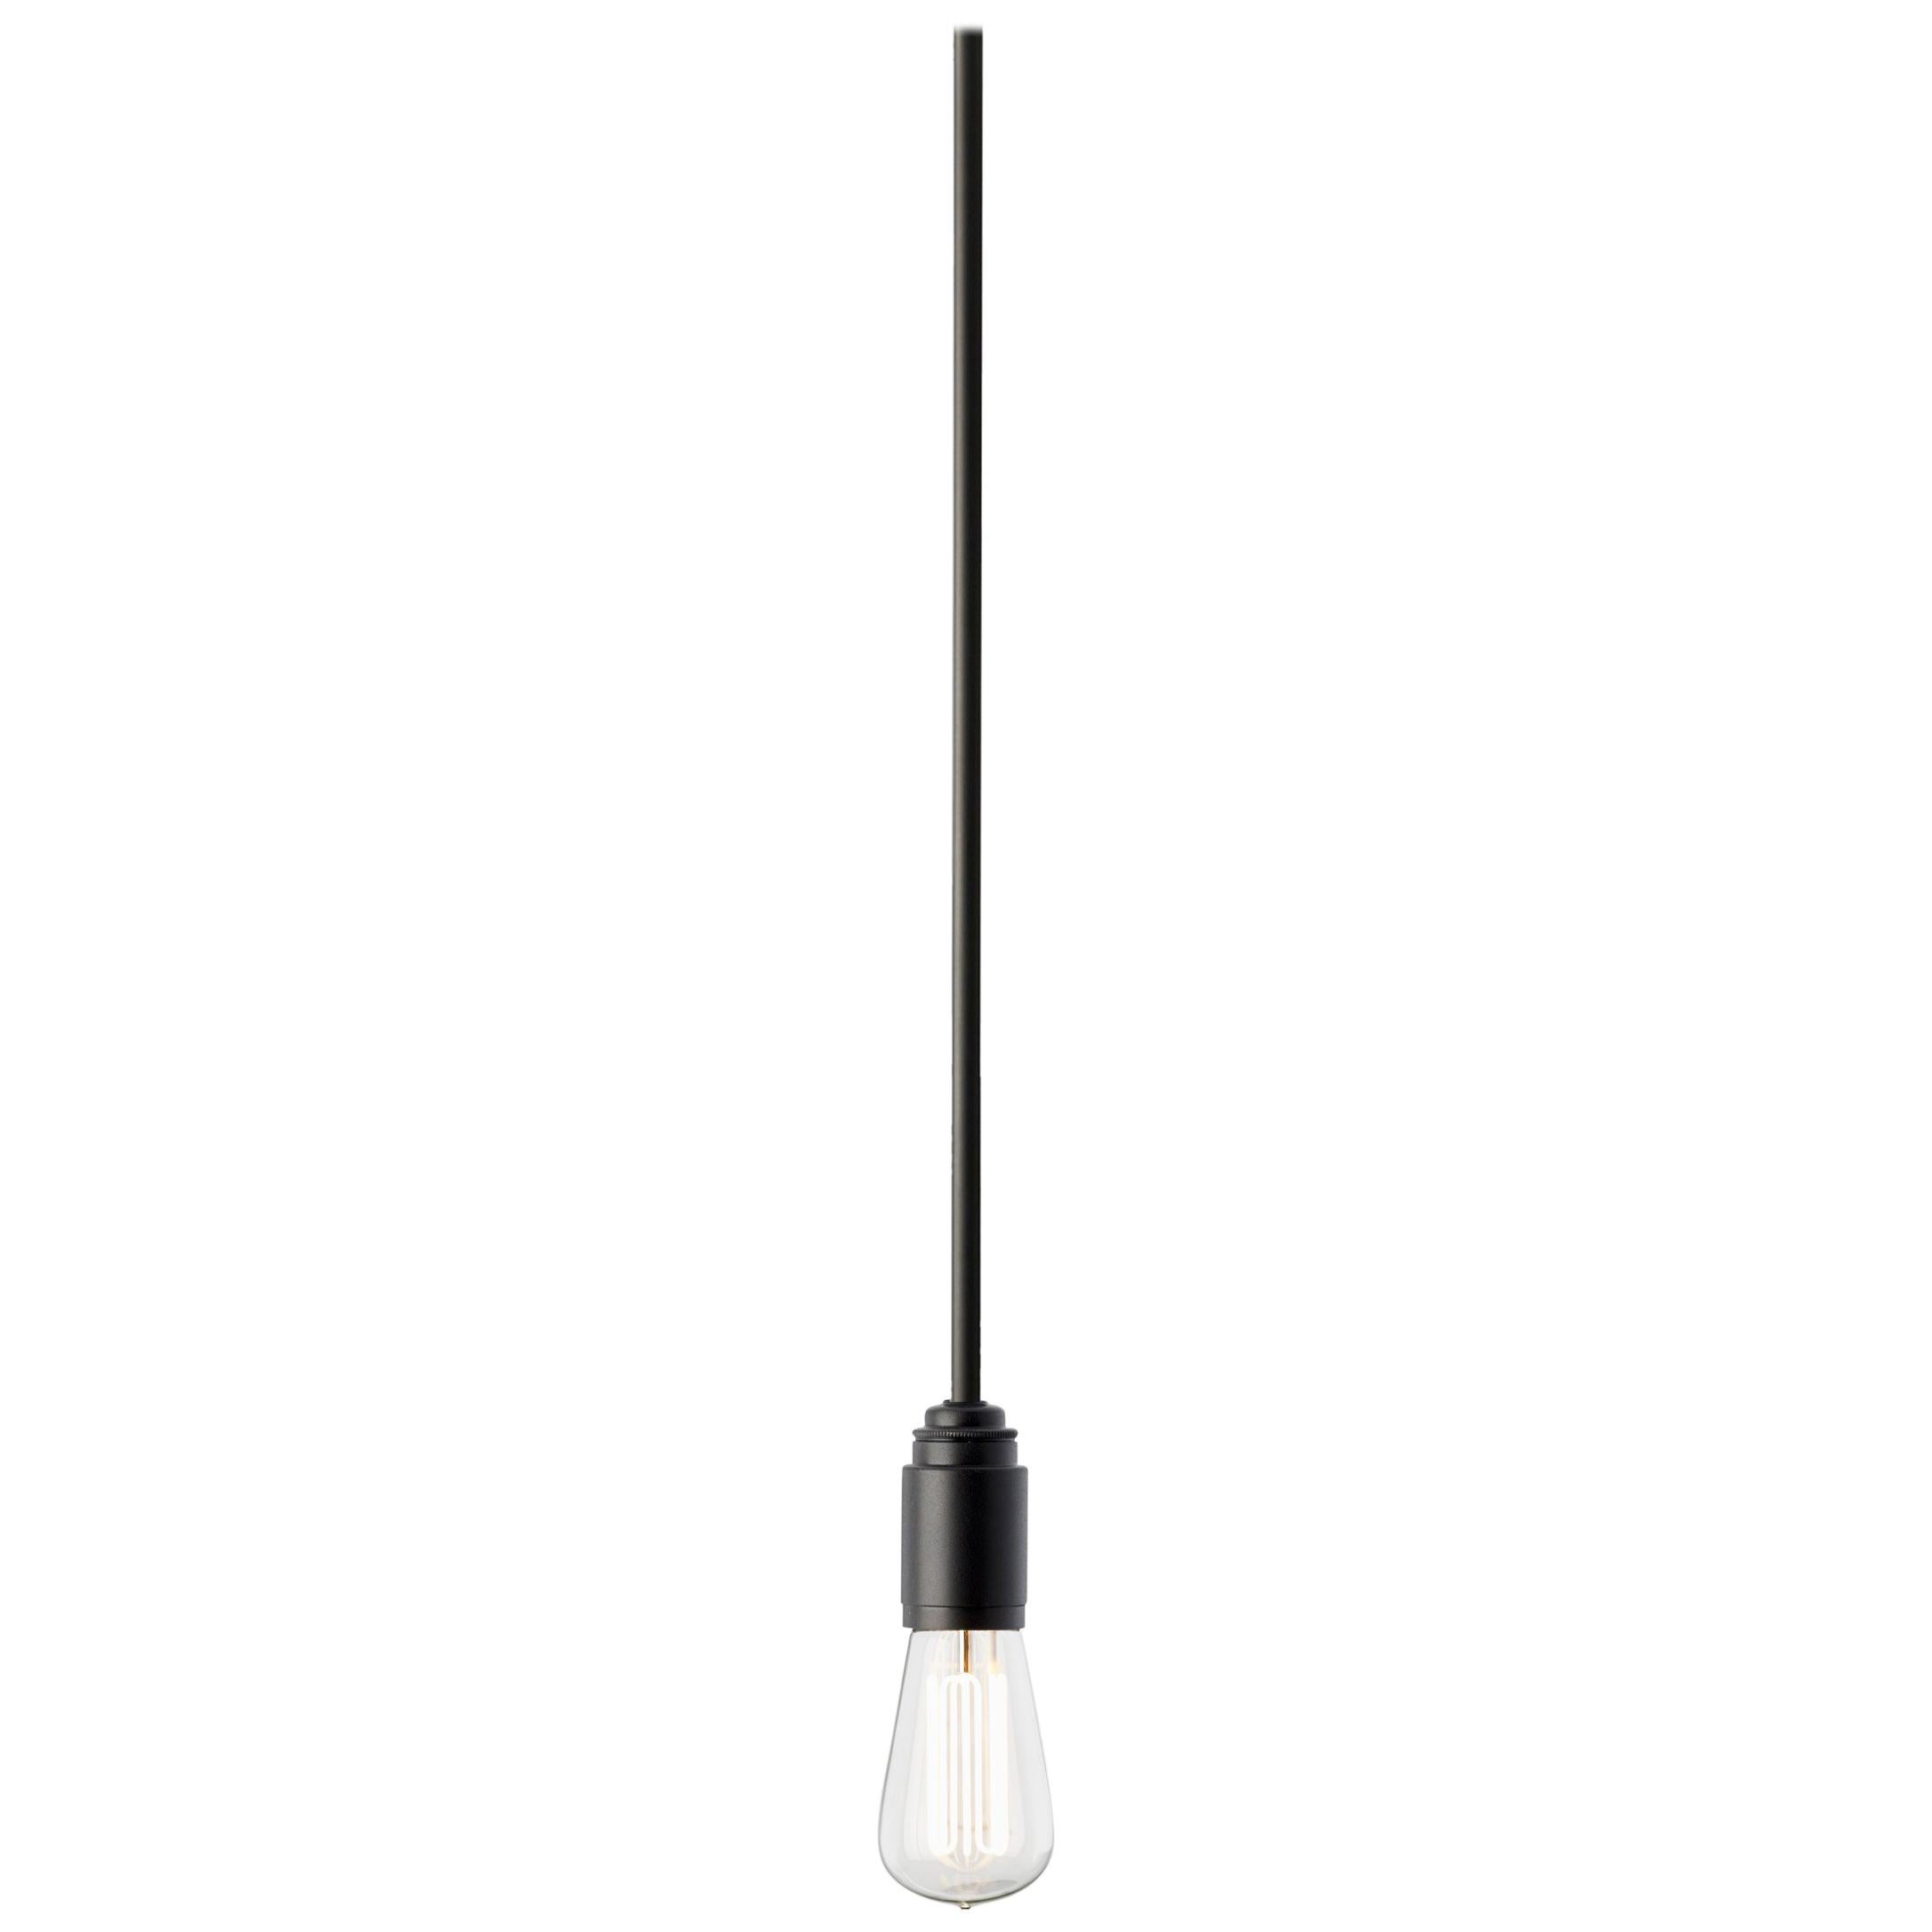 Tekna Thorn Pete Grip-C Pendant Light with Black Paint Finish and Ceiling Plate For Sale